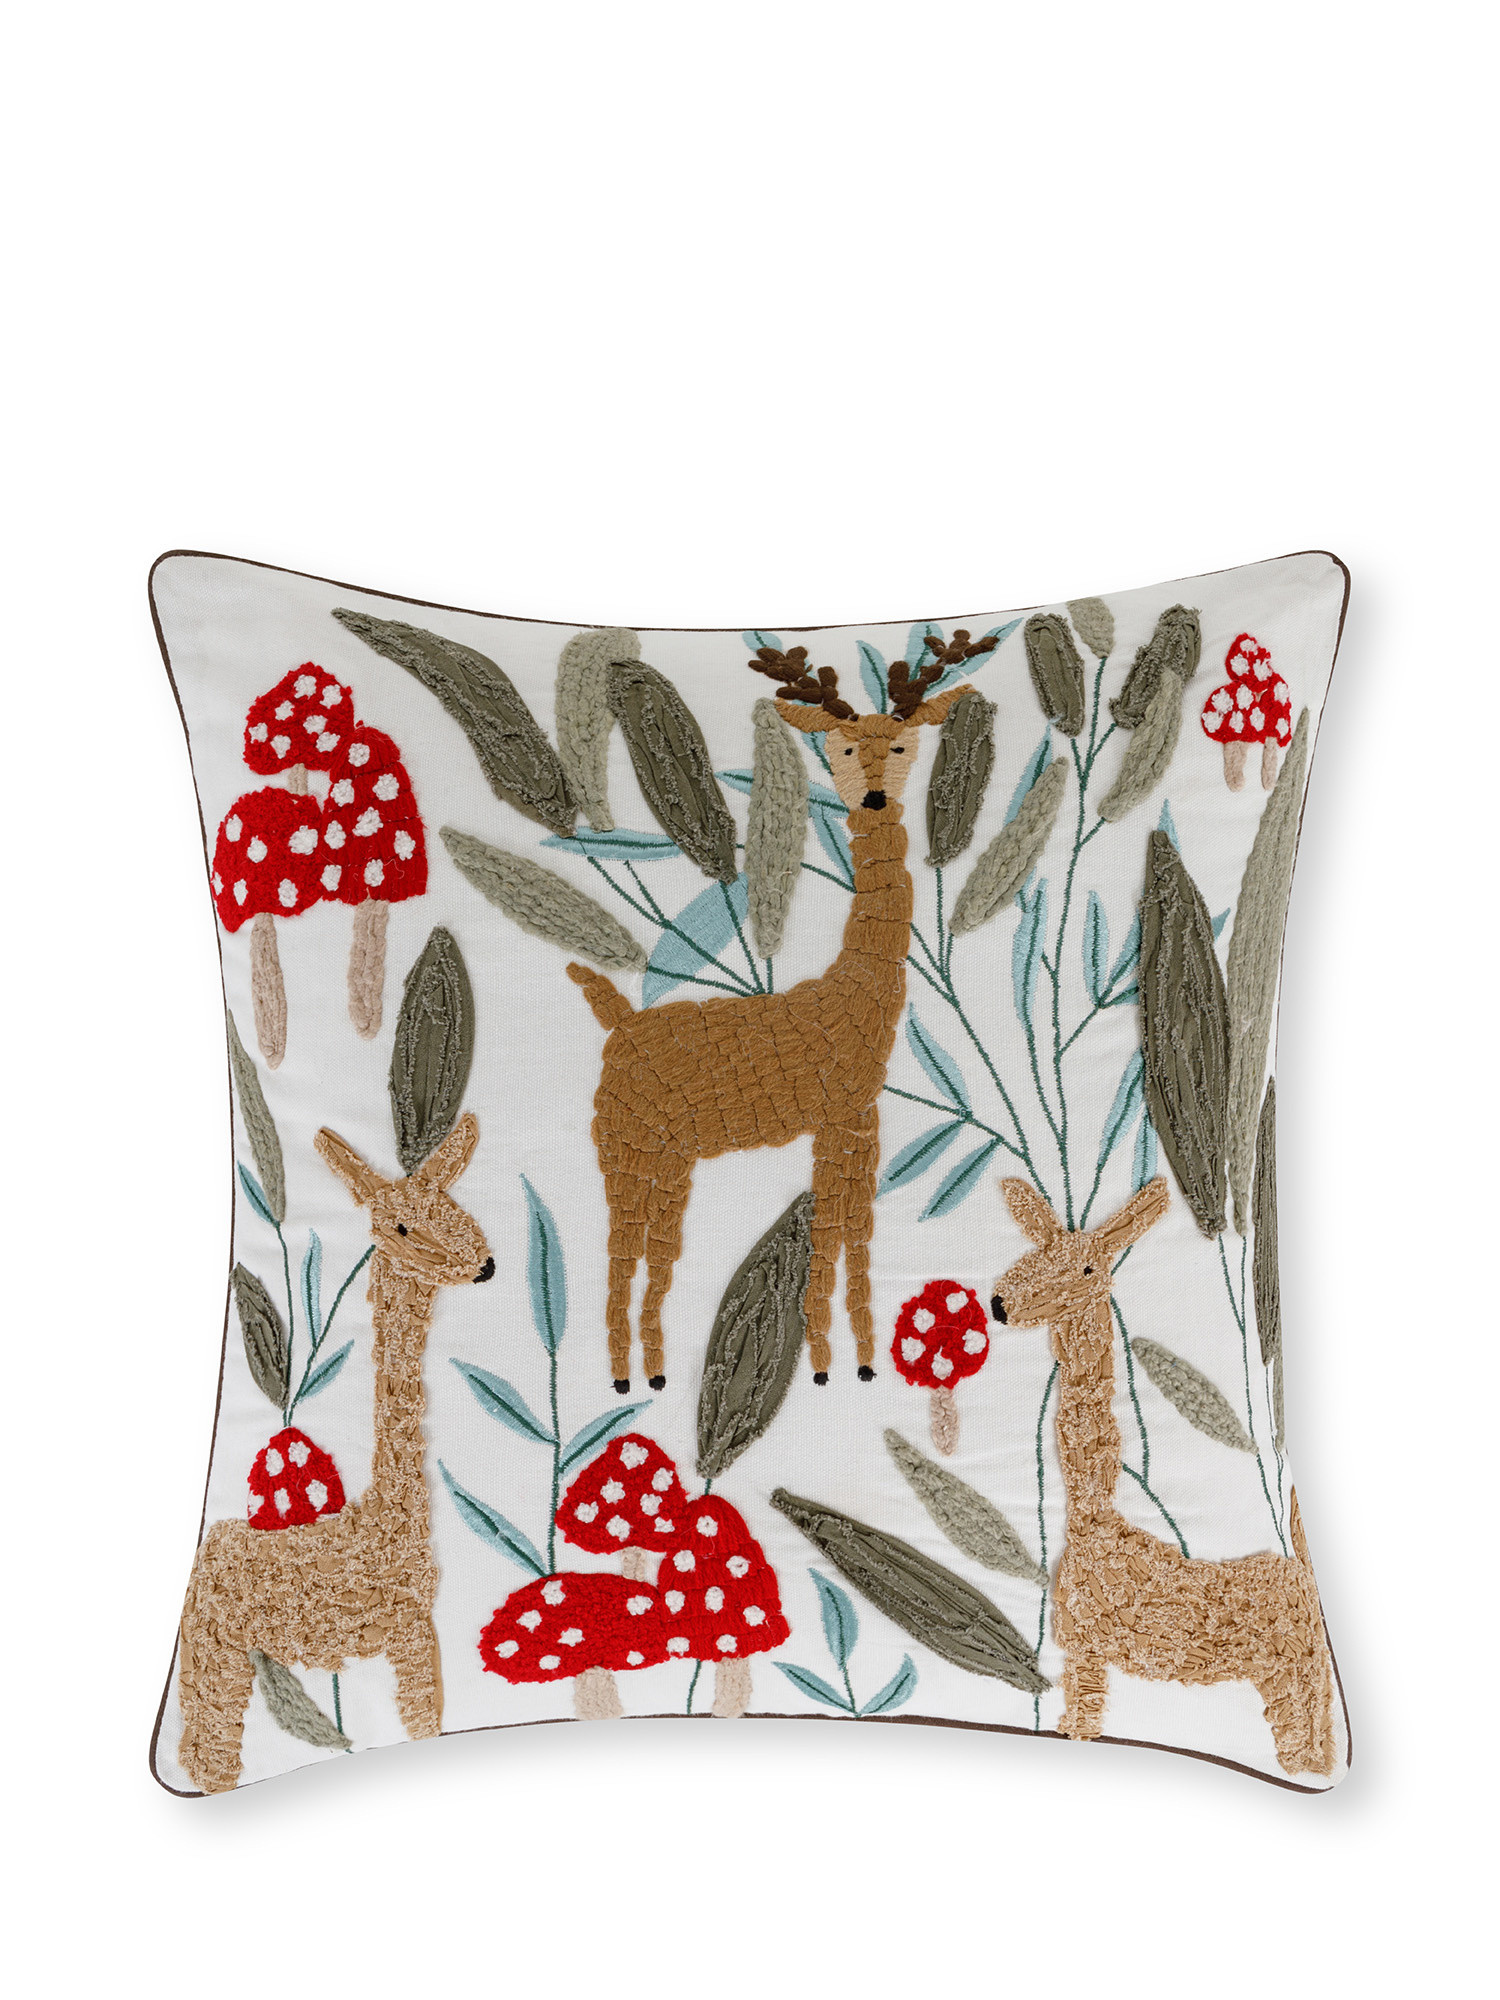 Deer embroidered cushion 45x45 cm, Multicolor, large image number 0